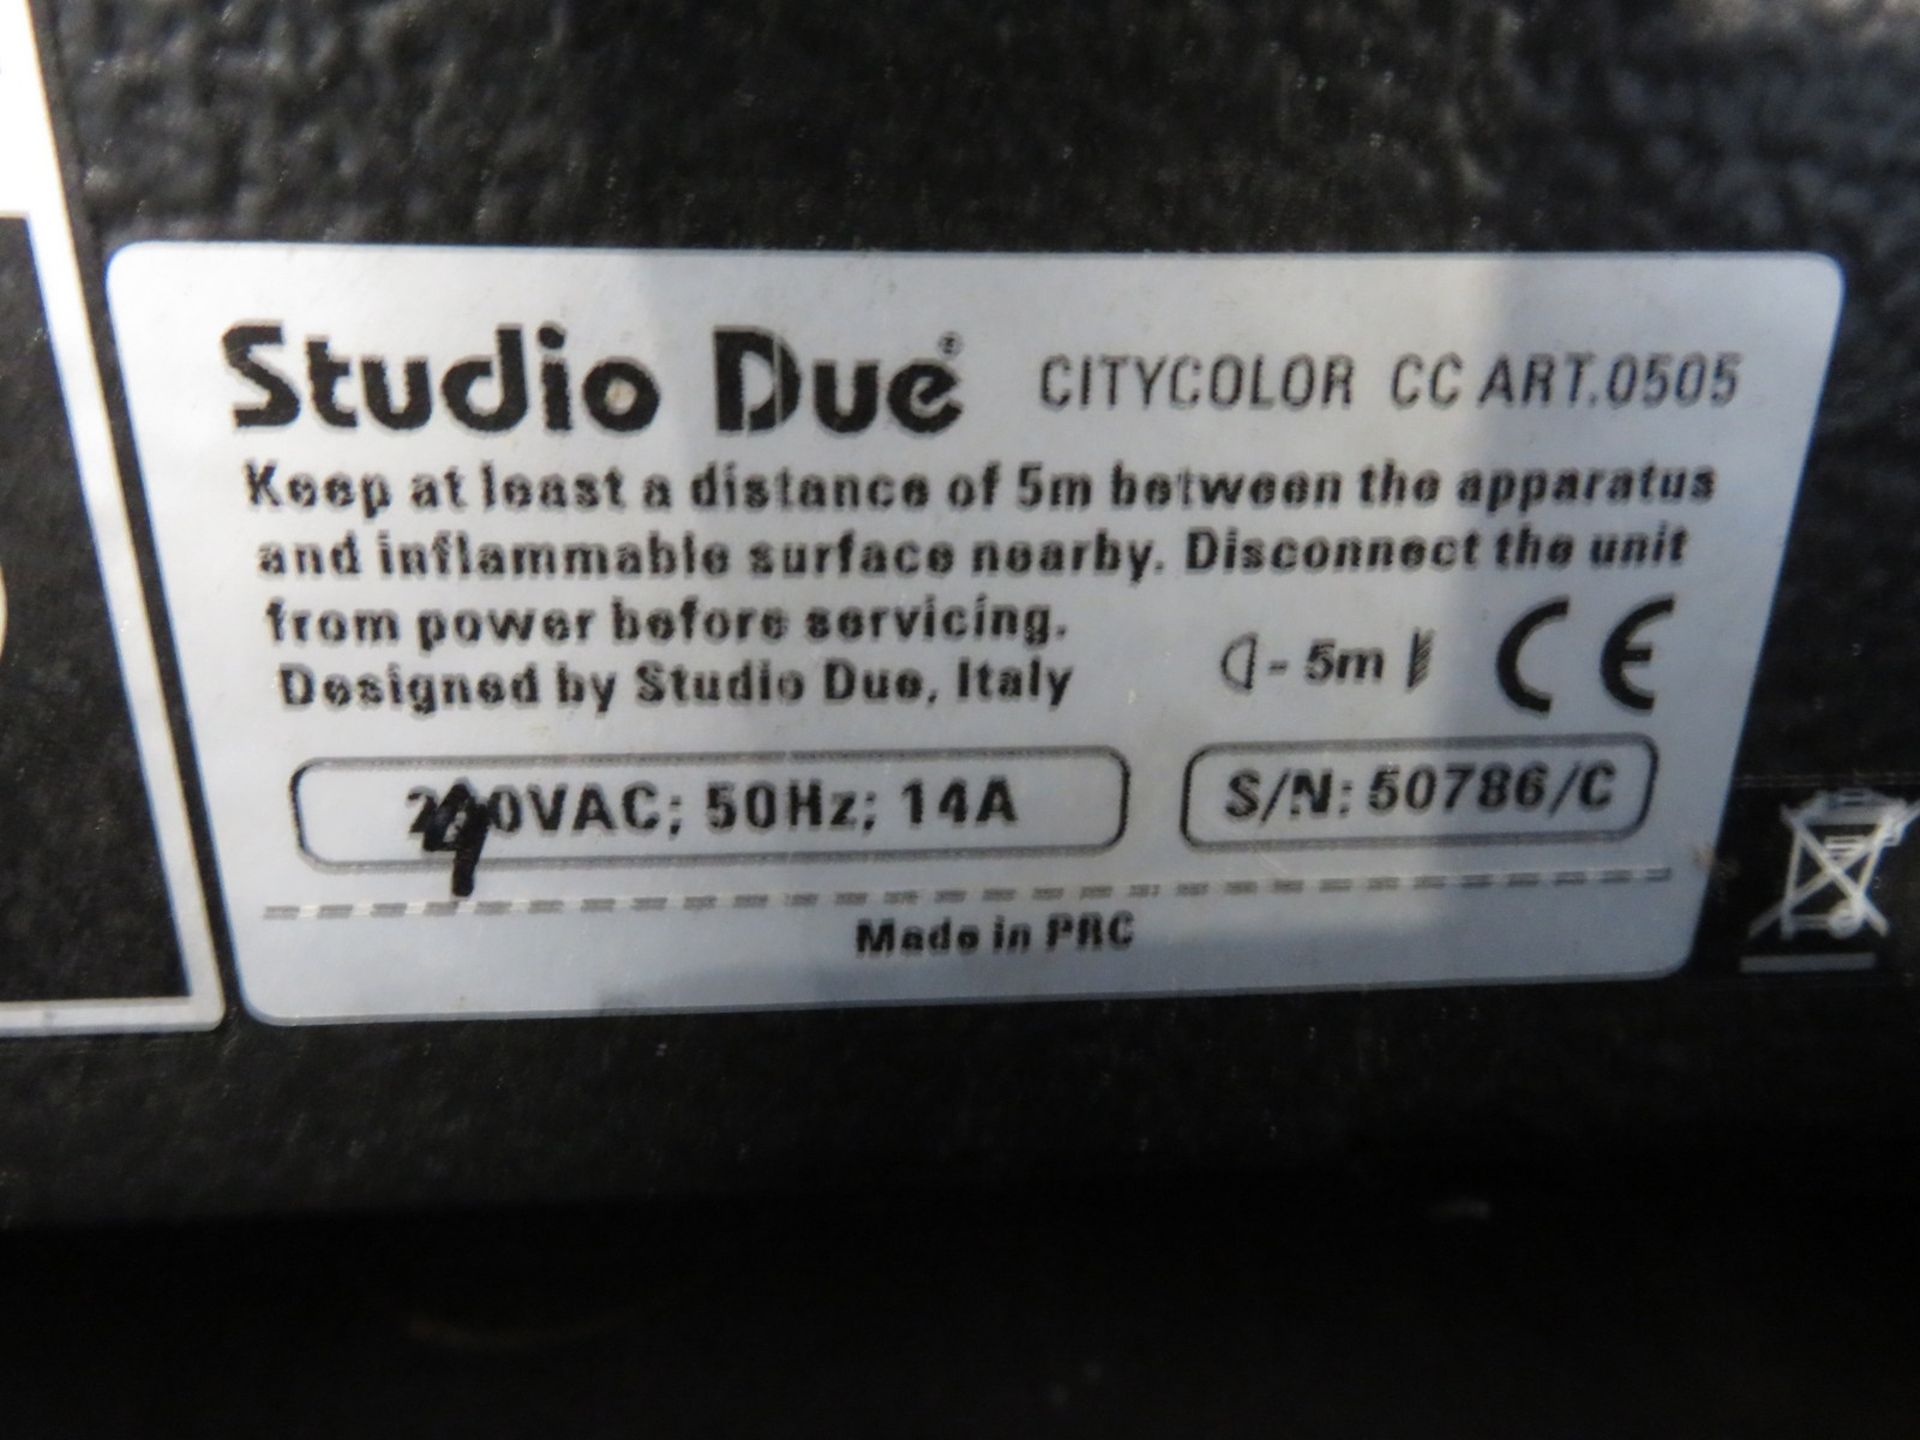 Studio Due City Colour 2500 Wash in flightcase. Working condition. Hours: 1320. - Image 5 of 9